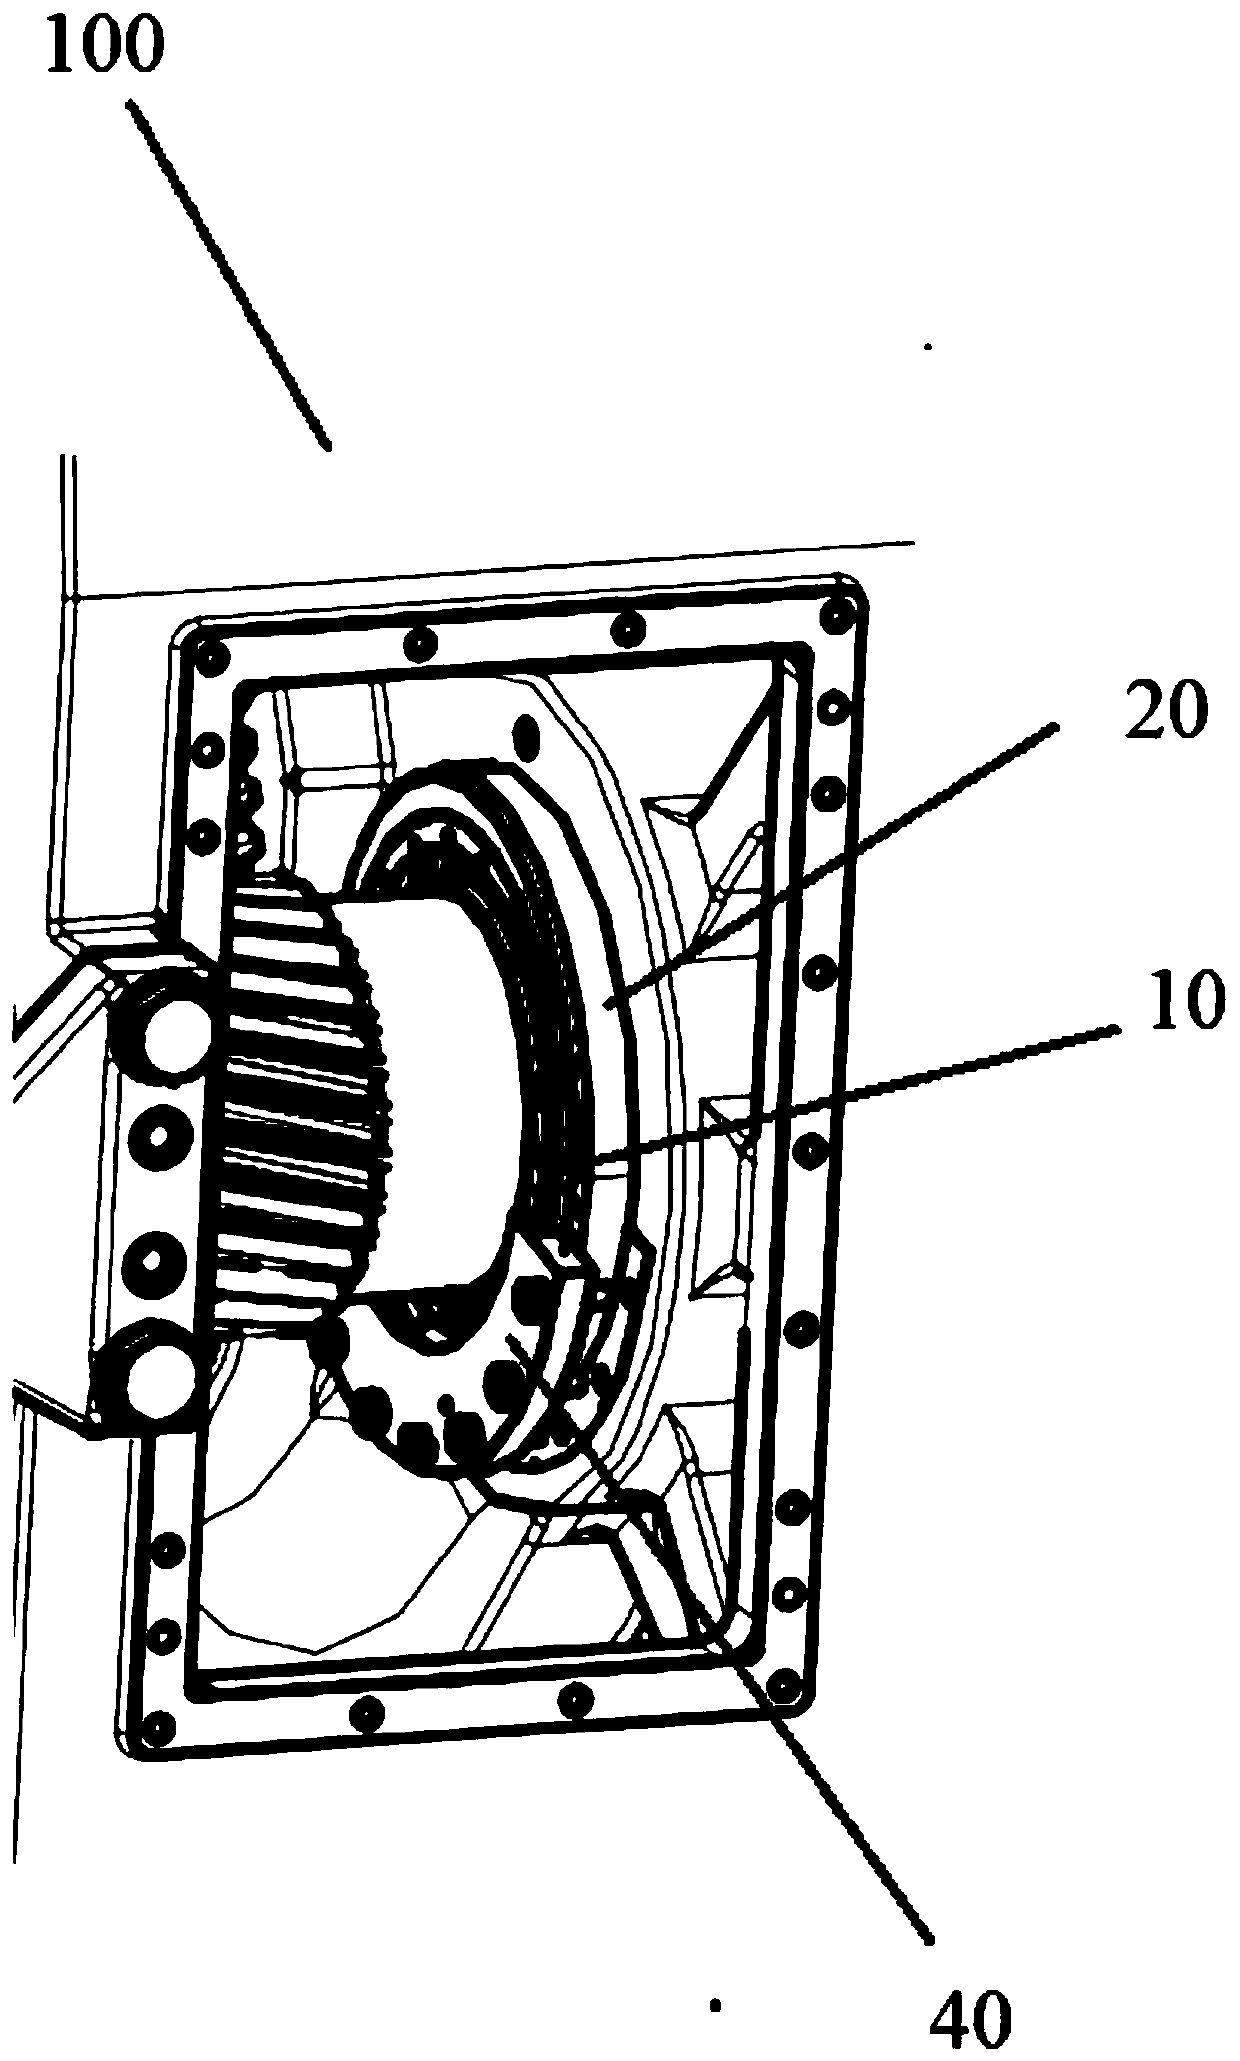 Bearing outer ring stop structure suitable for wind power gearbox